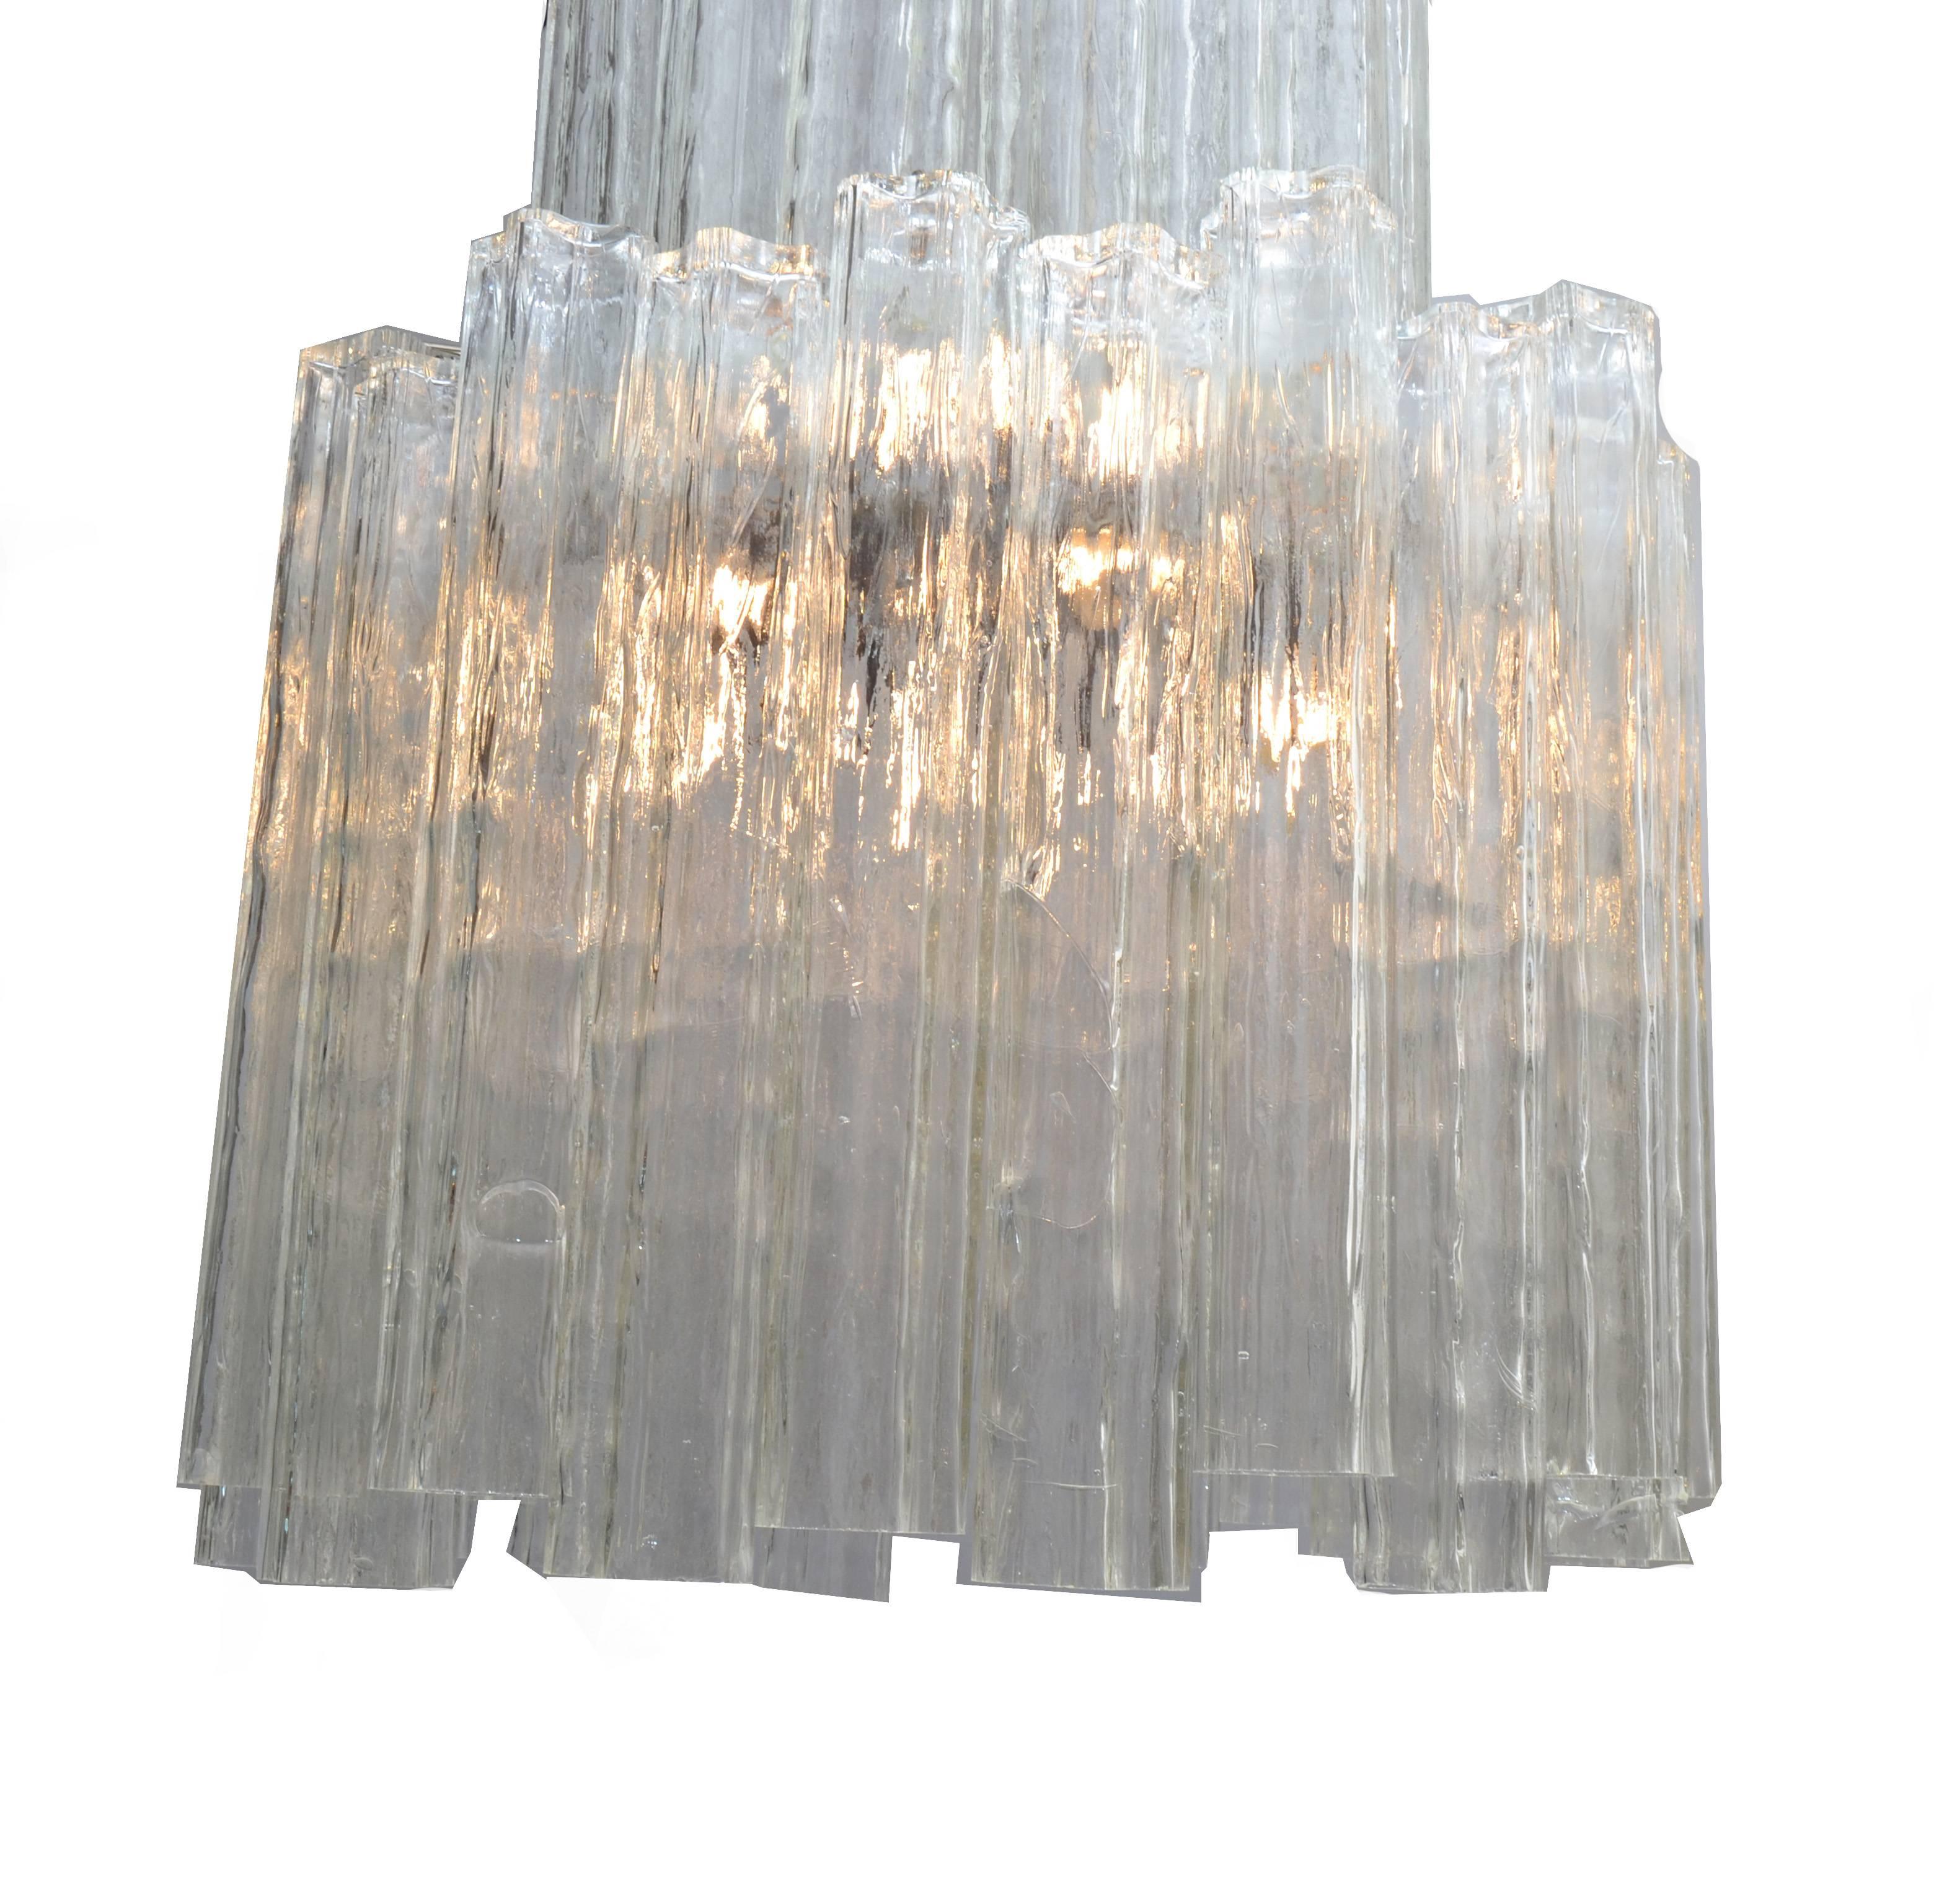 Hand-Crafted Italian Mid-Century Modern Two-Tier Long Crystal Tronchi Shades Chandelier For Sale